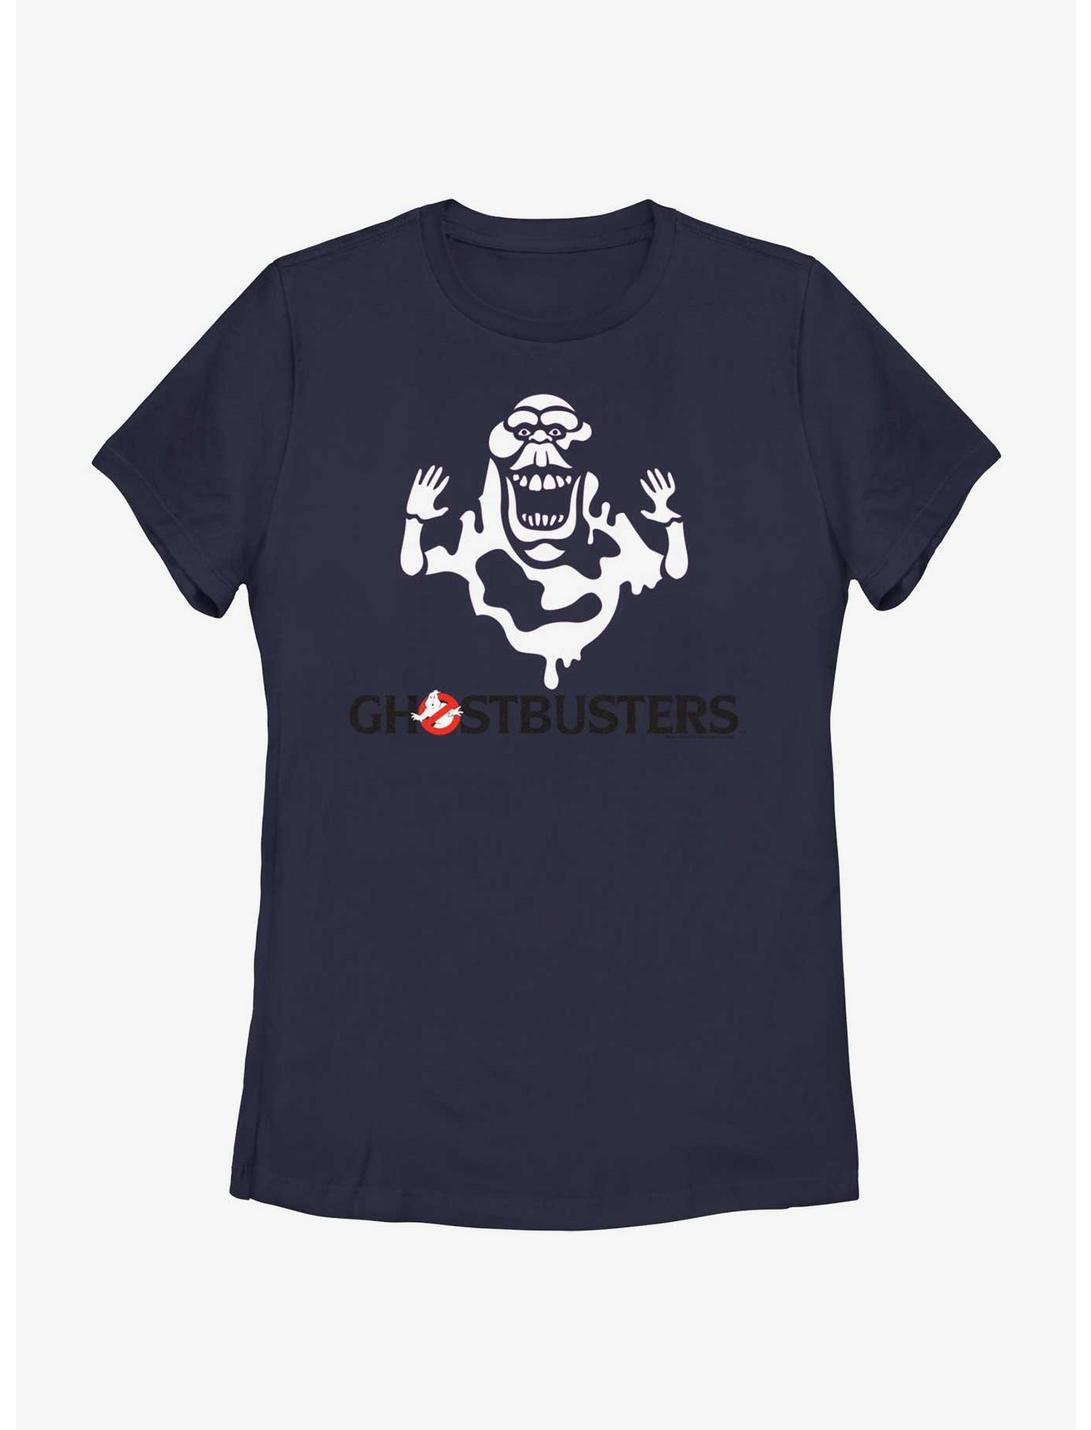 Ghostbusters: Frozen Empire Decal Slimer Womens T-Shirt, NAVY, hi-res